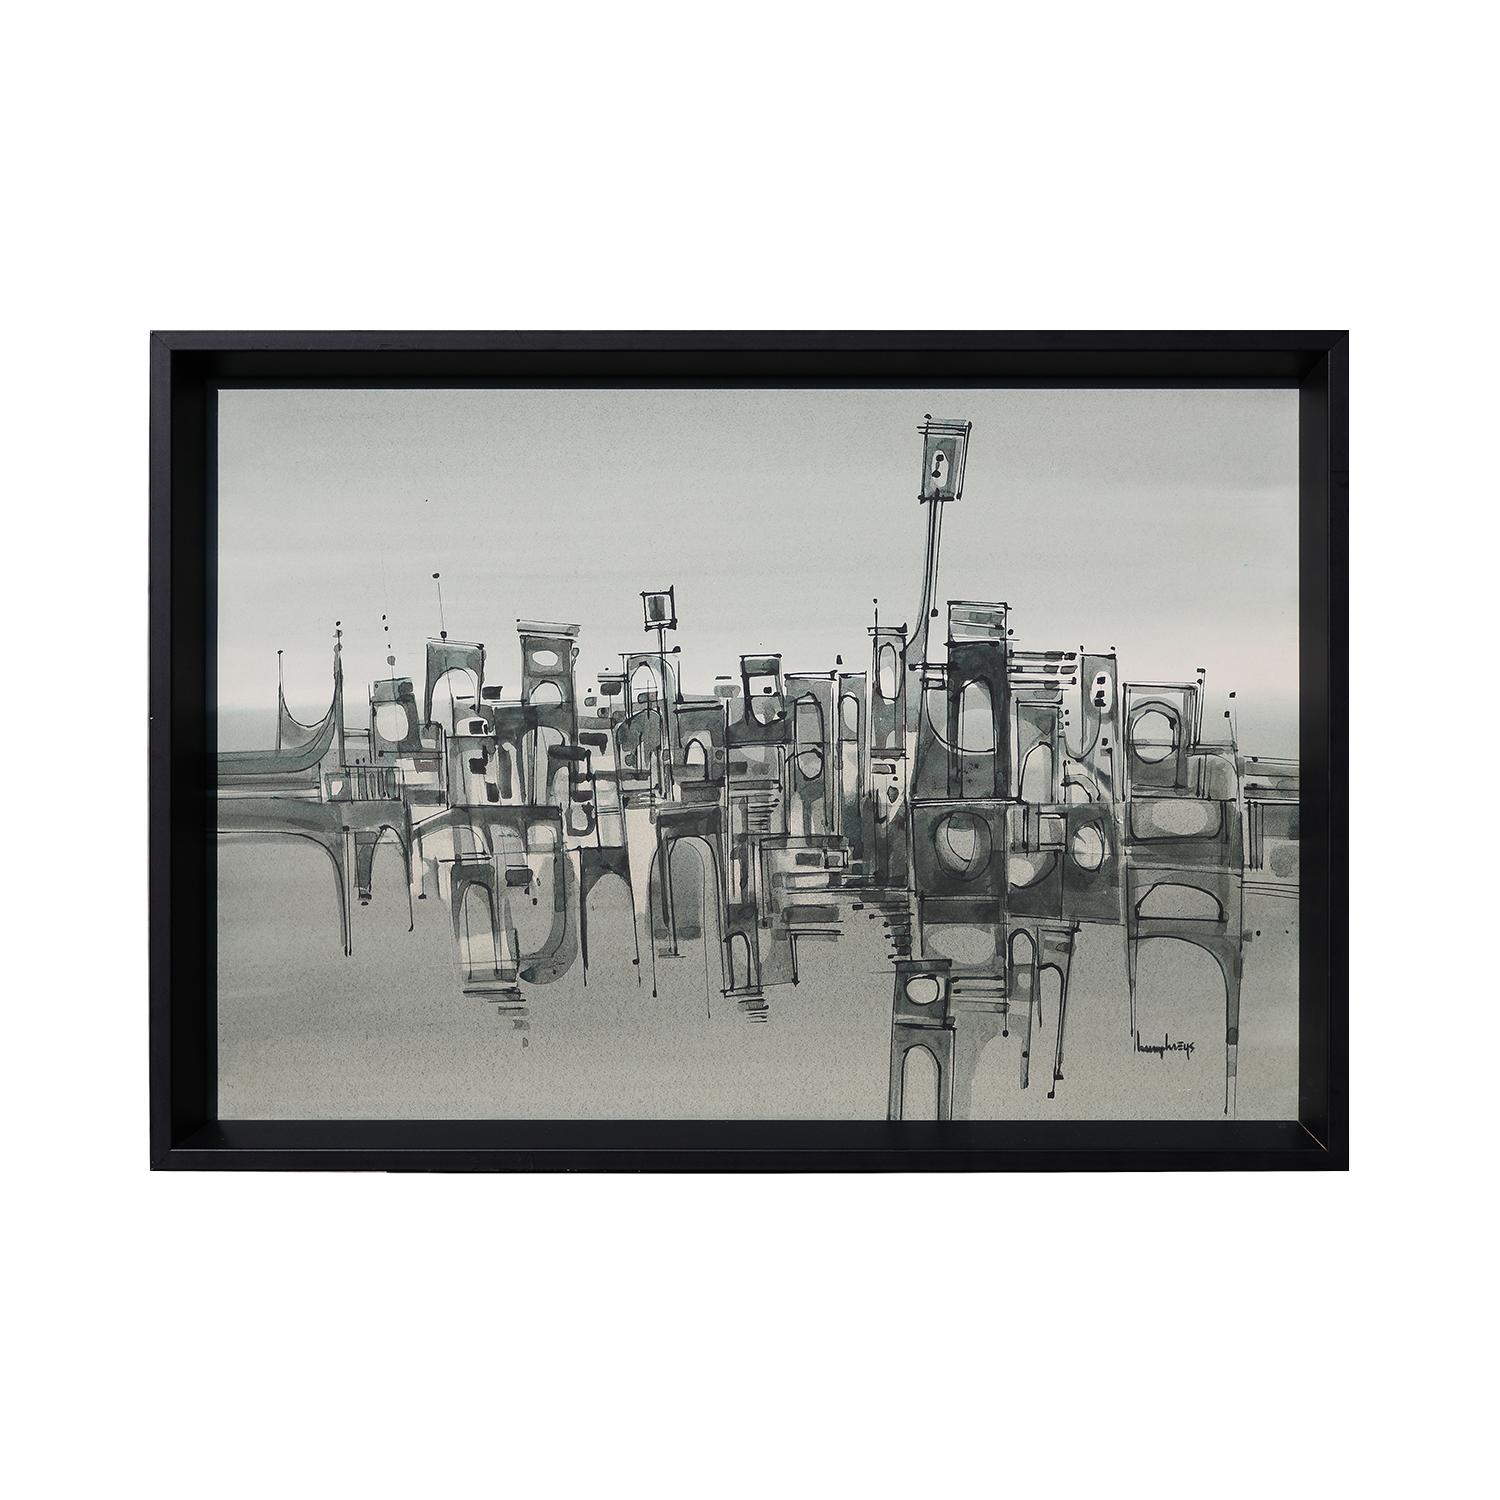 Modern Black, White, and Gray Monochromatic Abstract Geometric Cityscape - Art by Humphreys